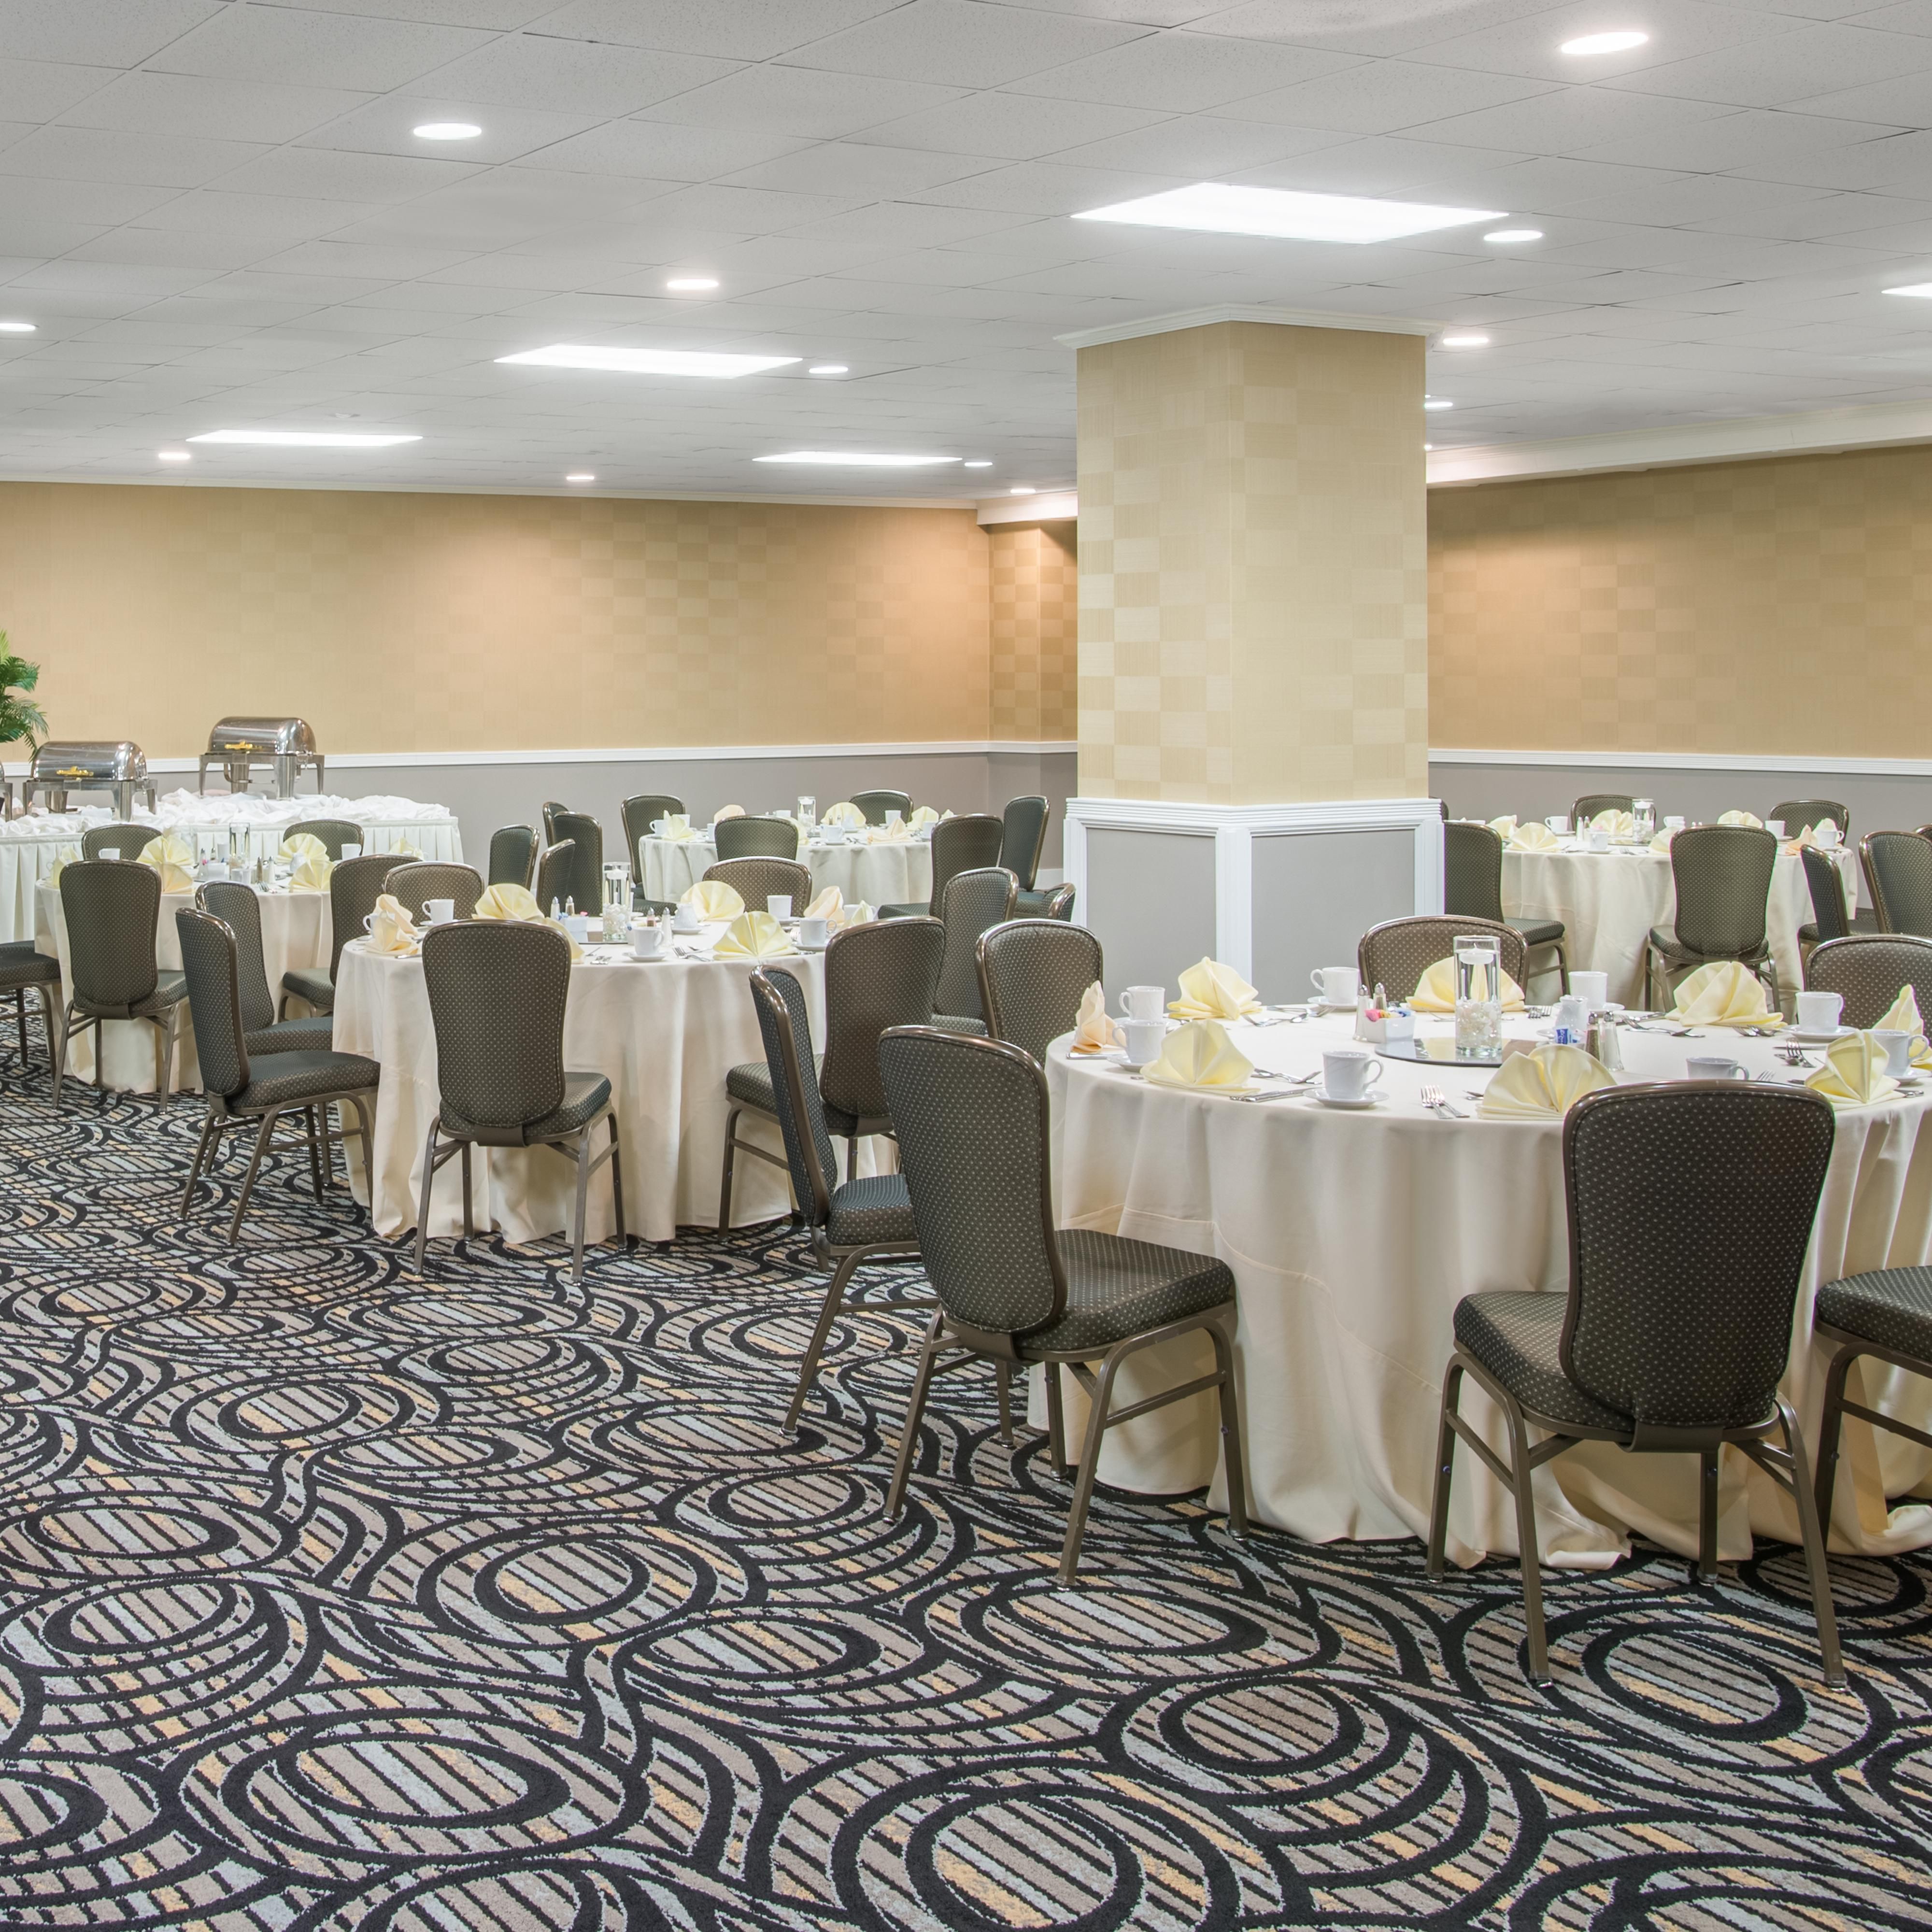 The Gallery Room is perfect for an intimate luncheon or gathering 